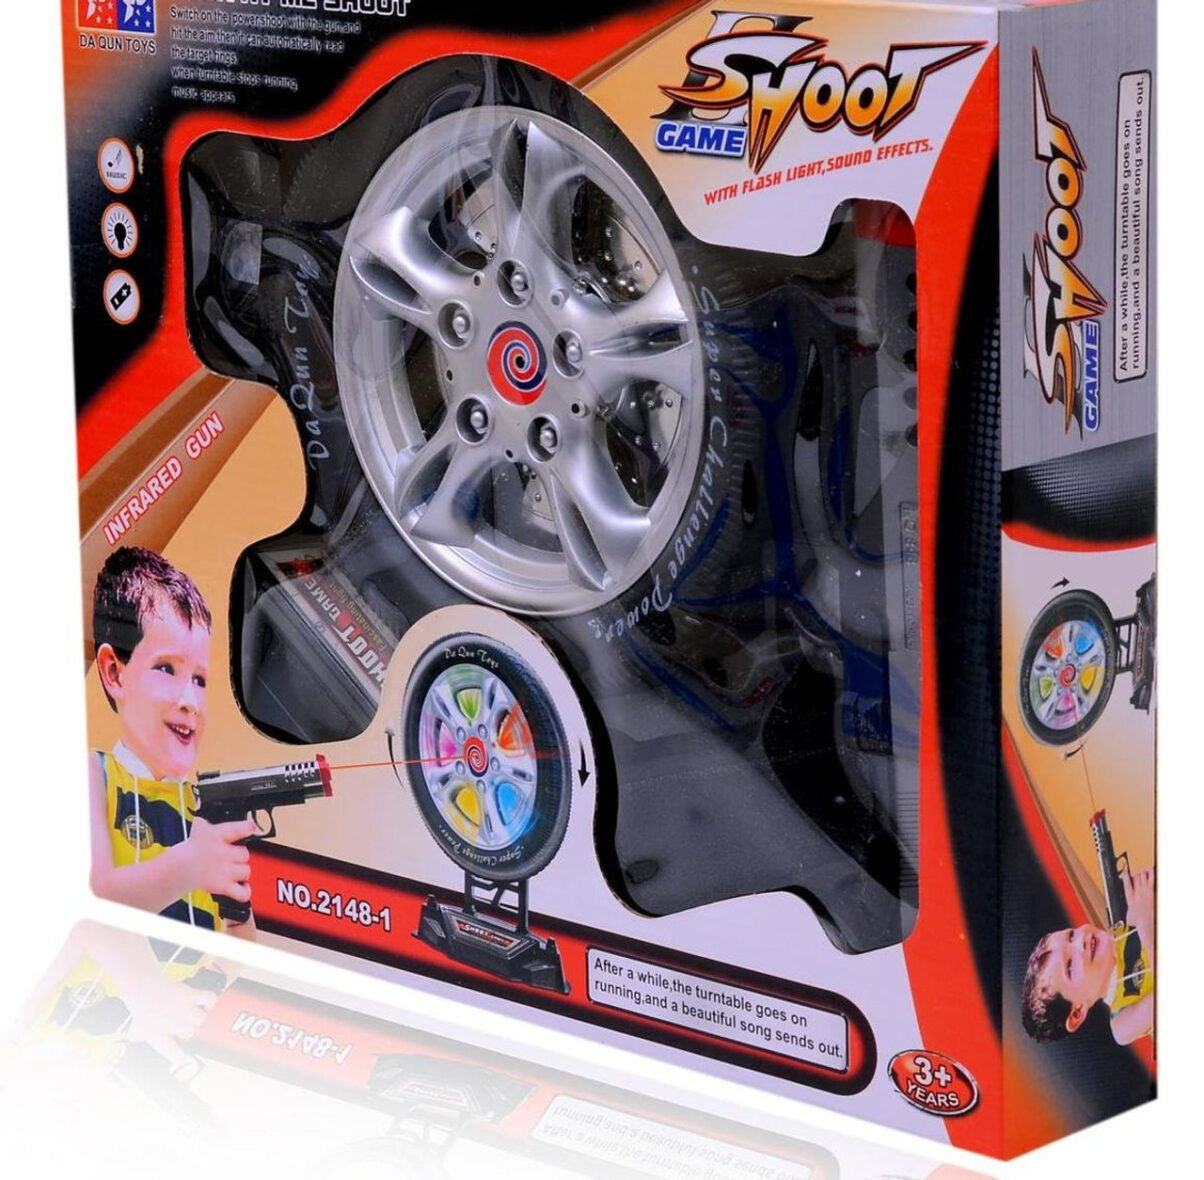 U Smile Turntable Shoot Game with Infrared Gun, Black for boys and girls